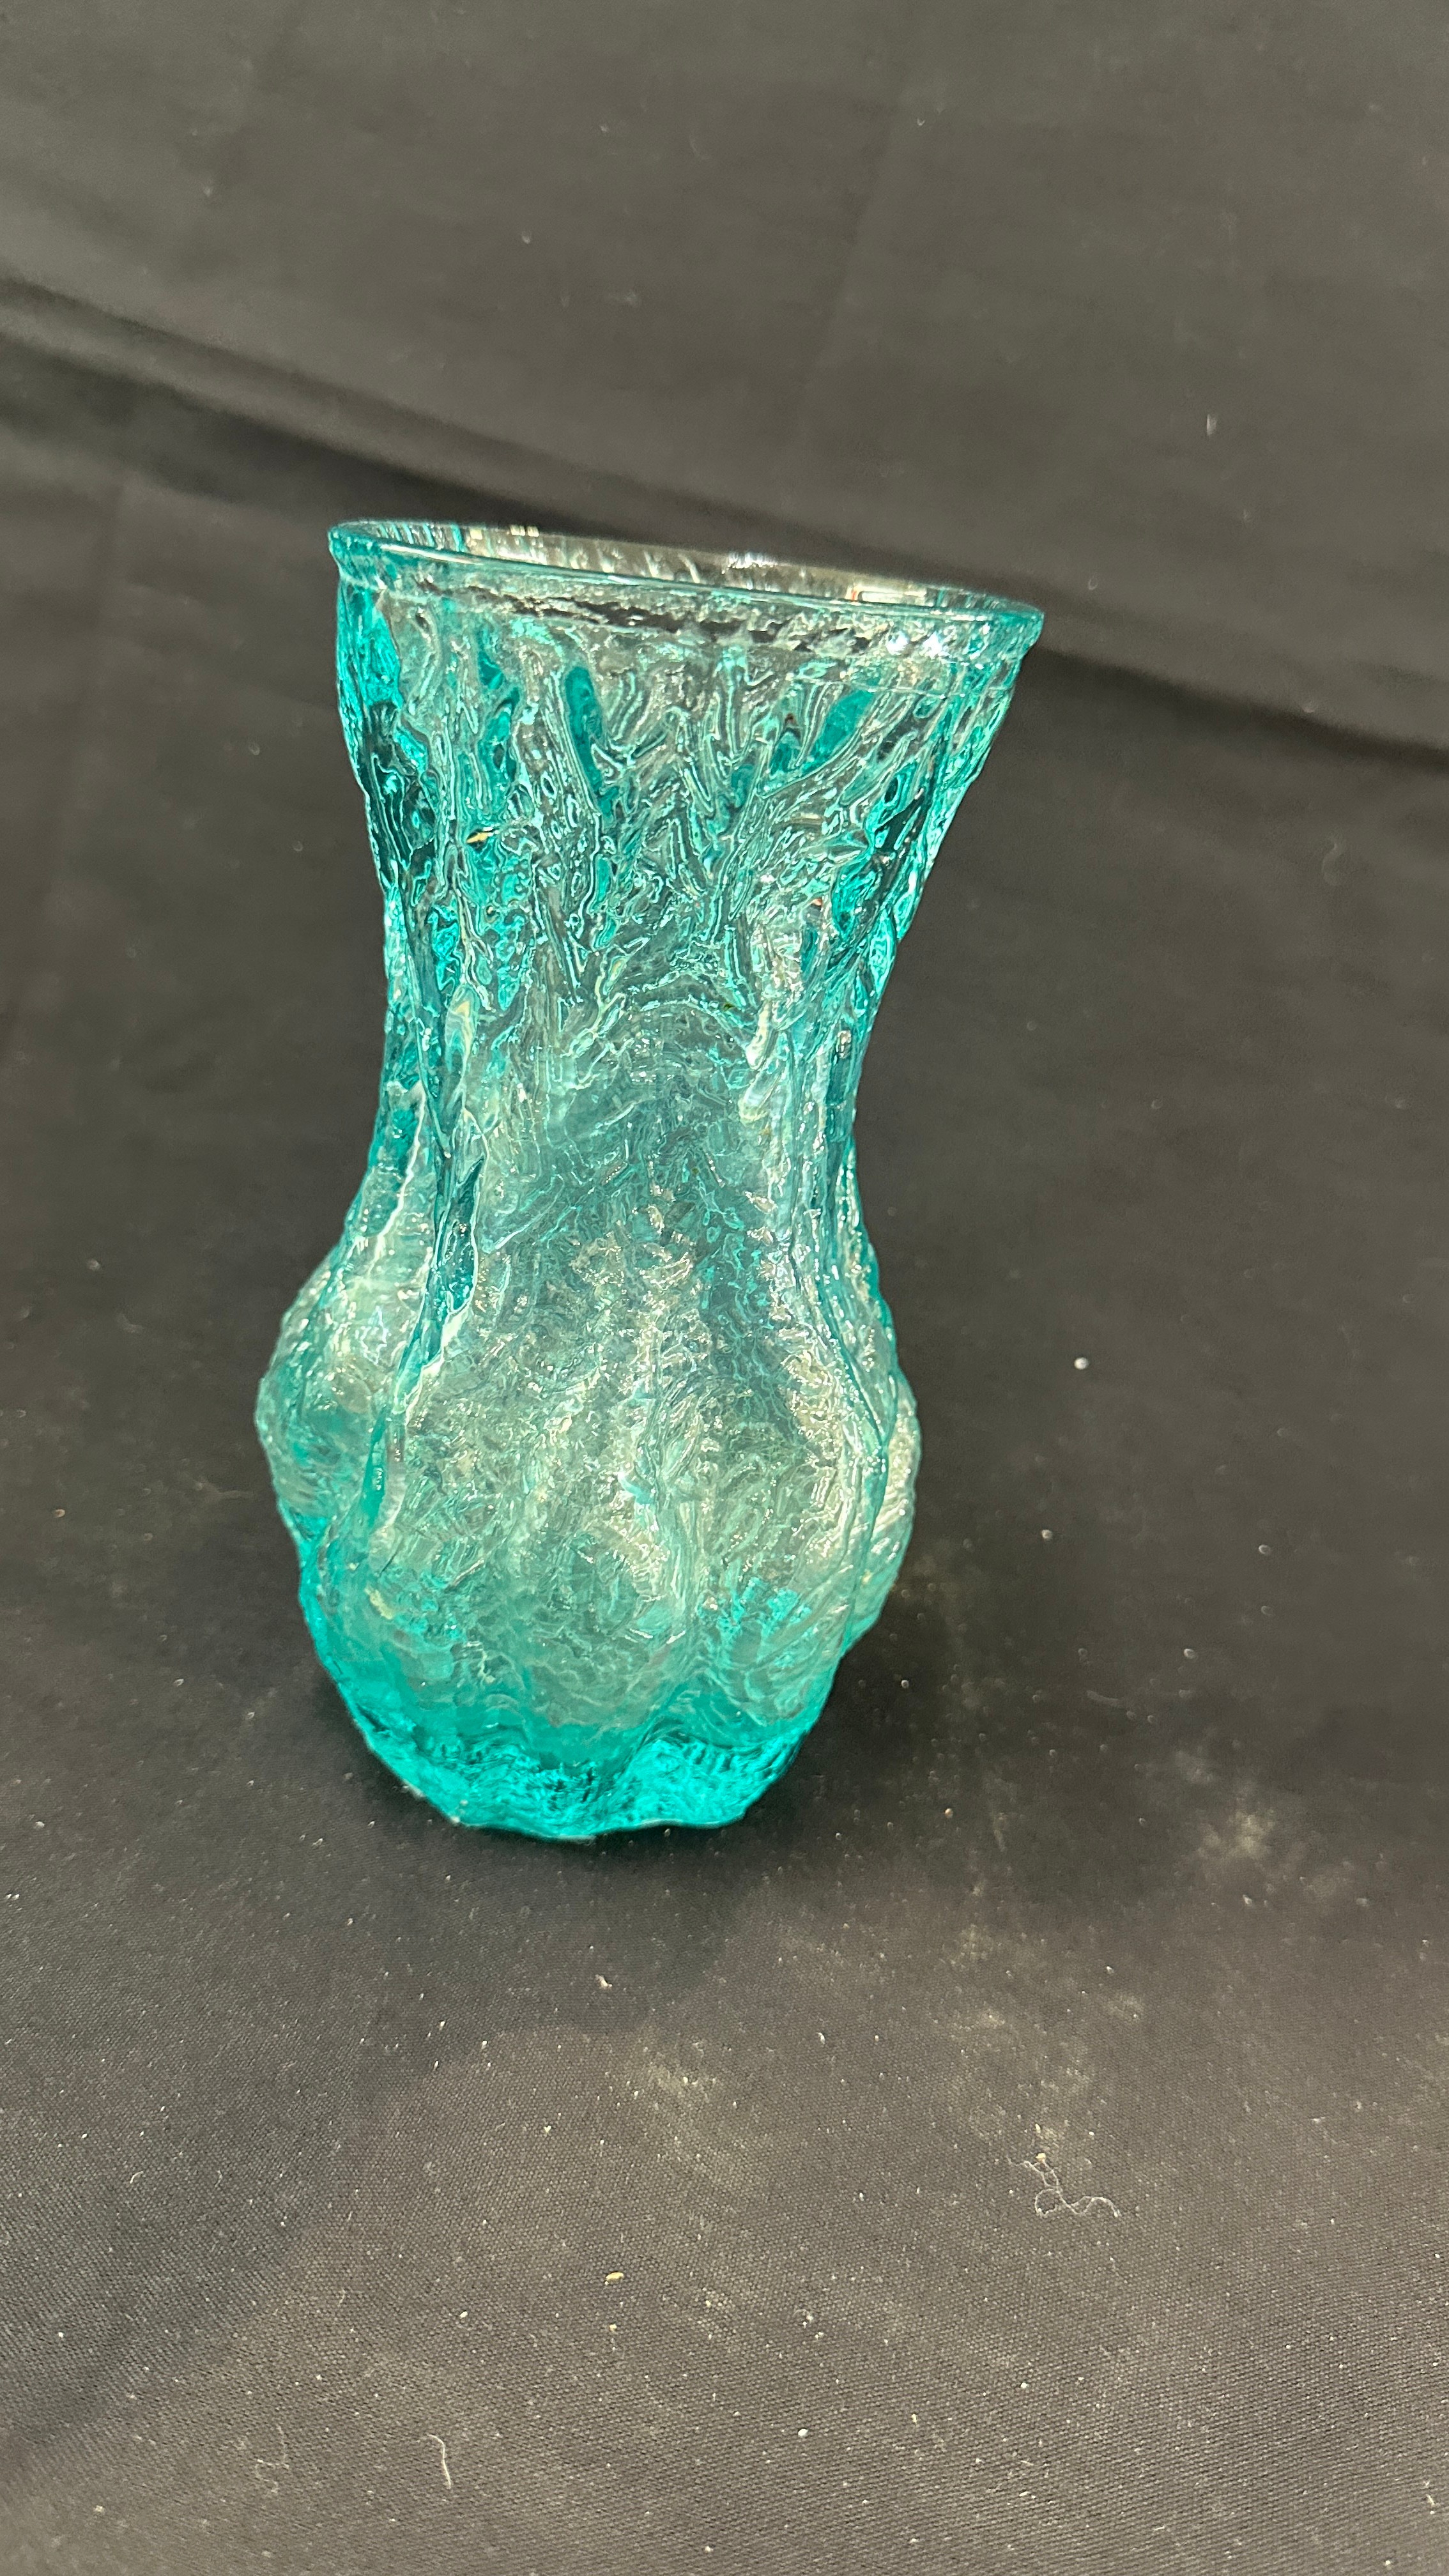 Decorative glass vase, possibly Whitefriars, overall height 8 inches - Image 4 of 5